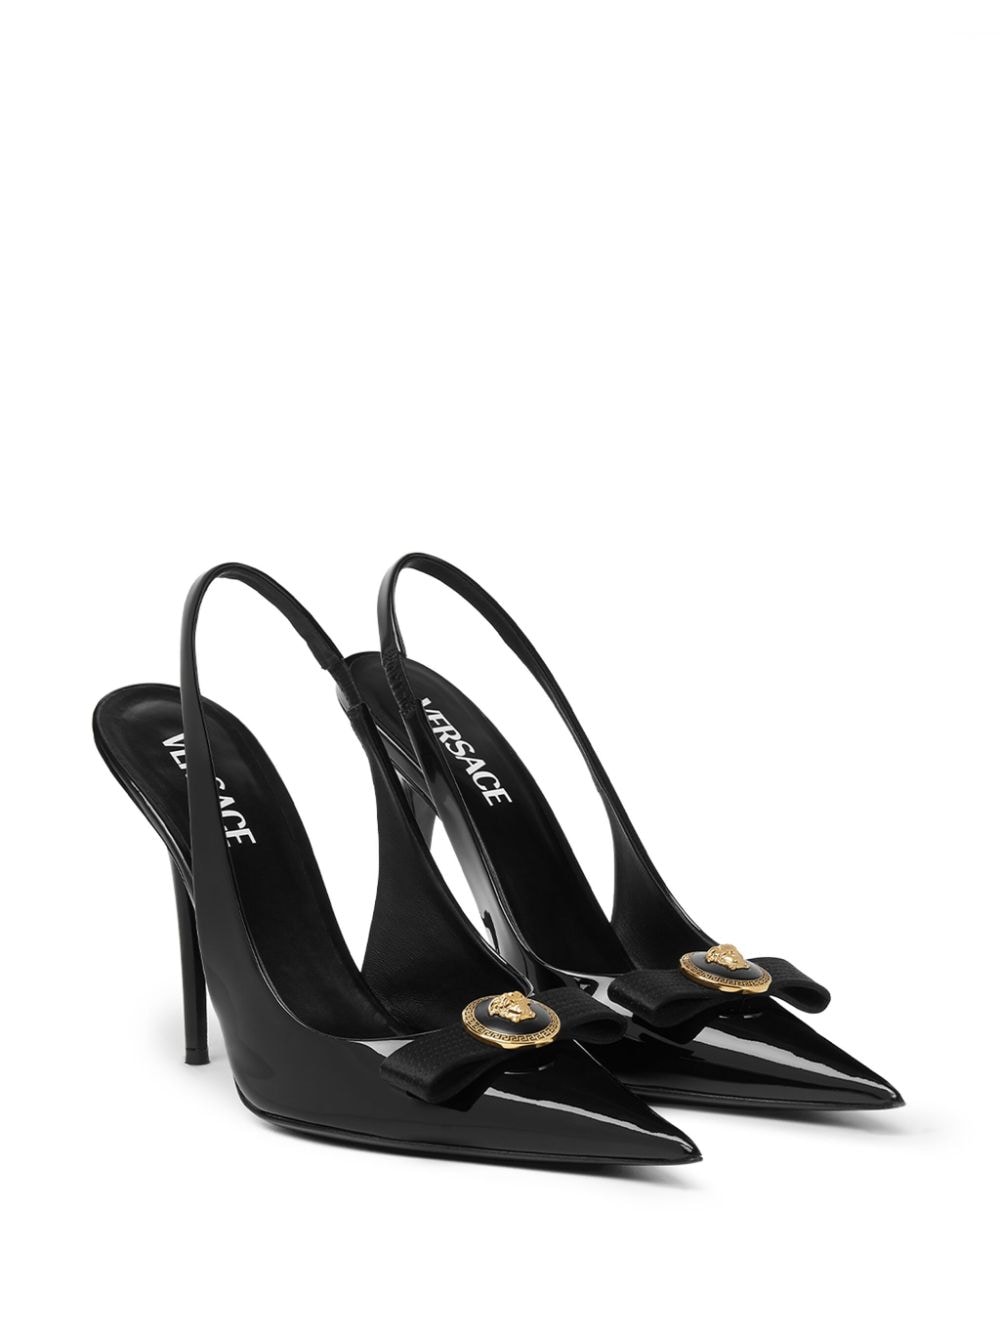 Versace Gianni 120mm leather pumps Black